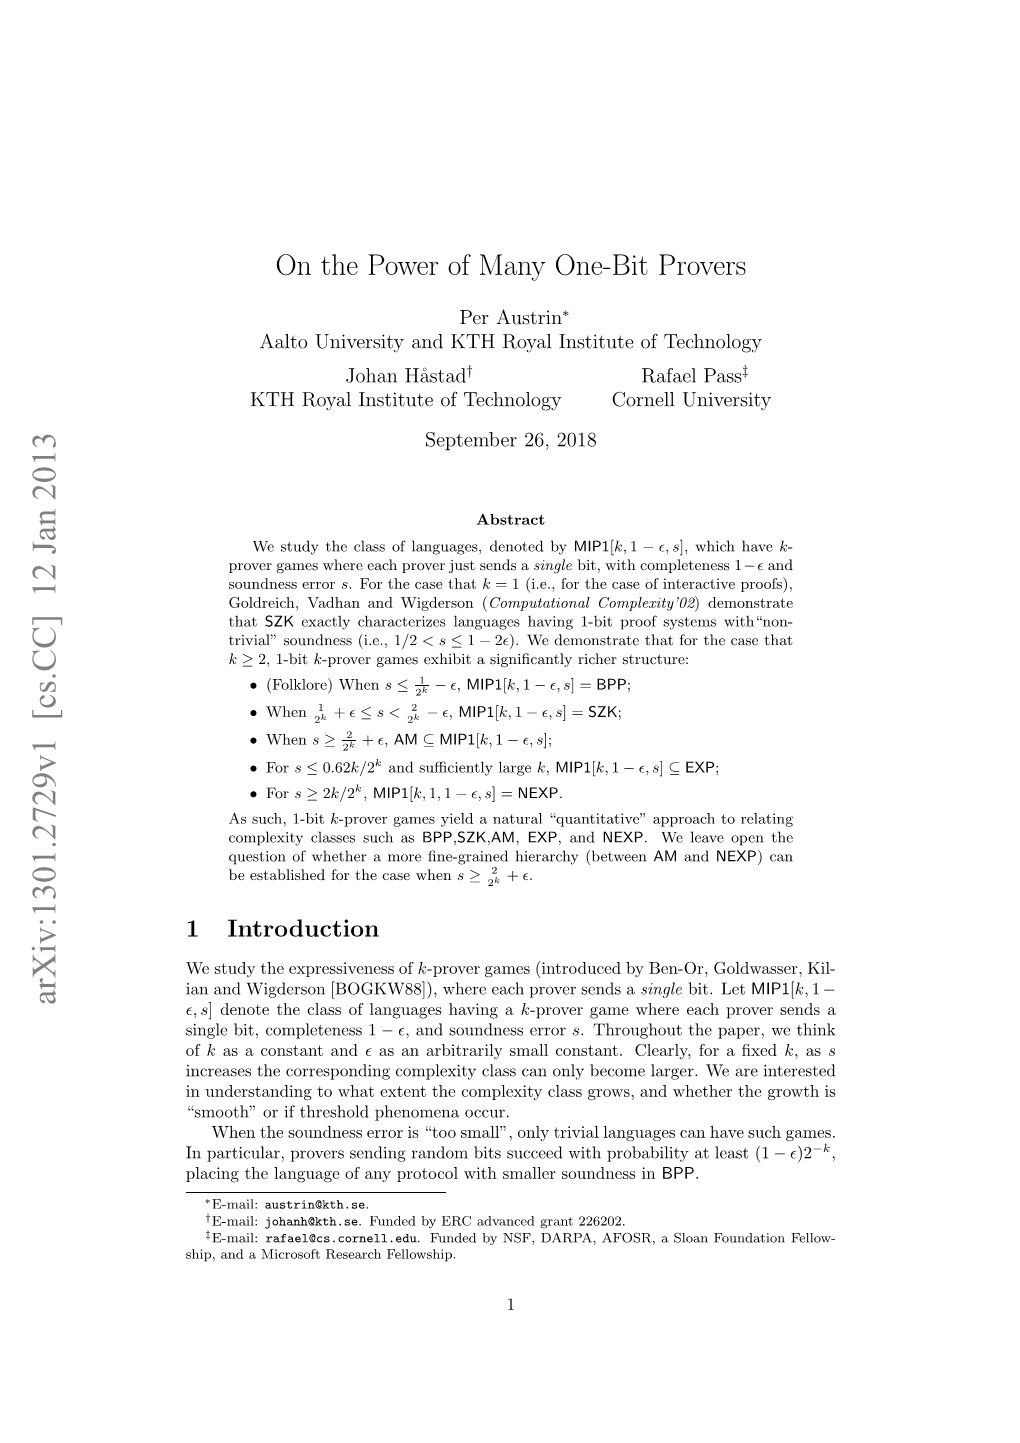 On the Power of Many One-Bit Provers